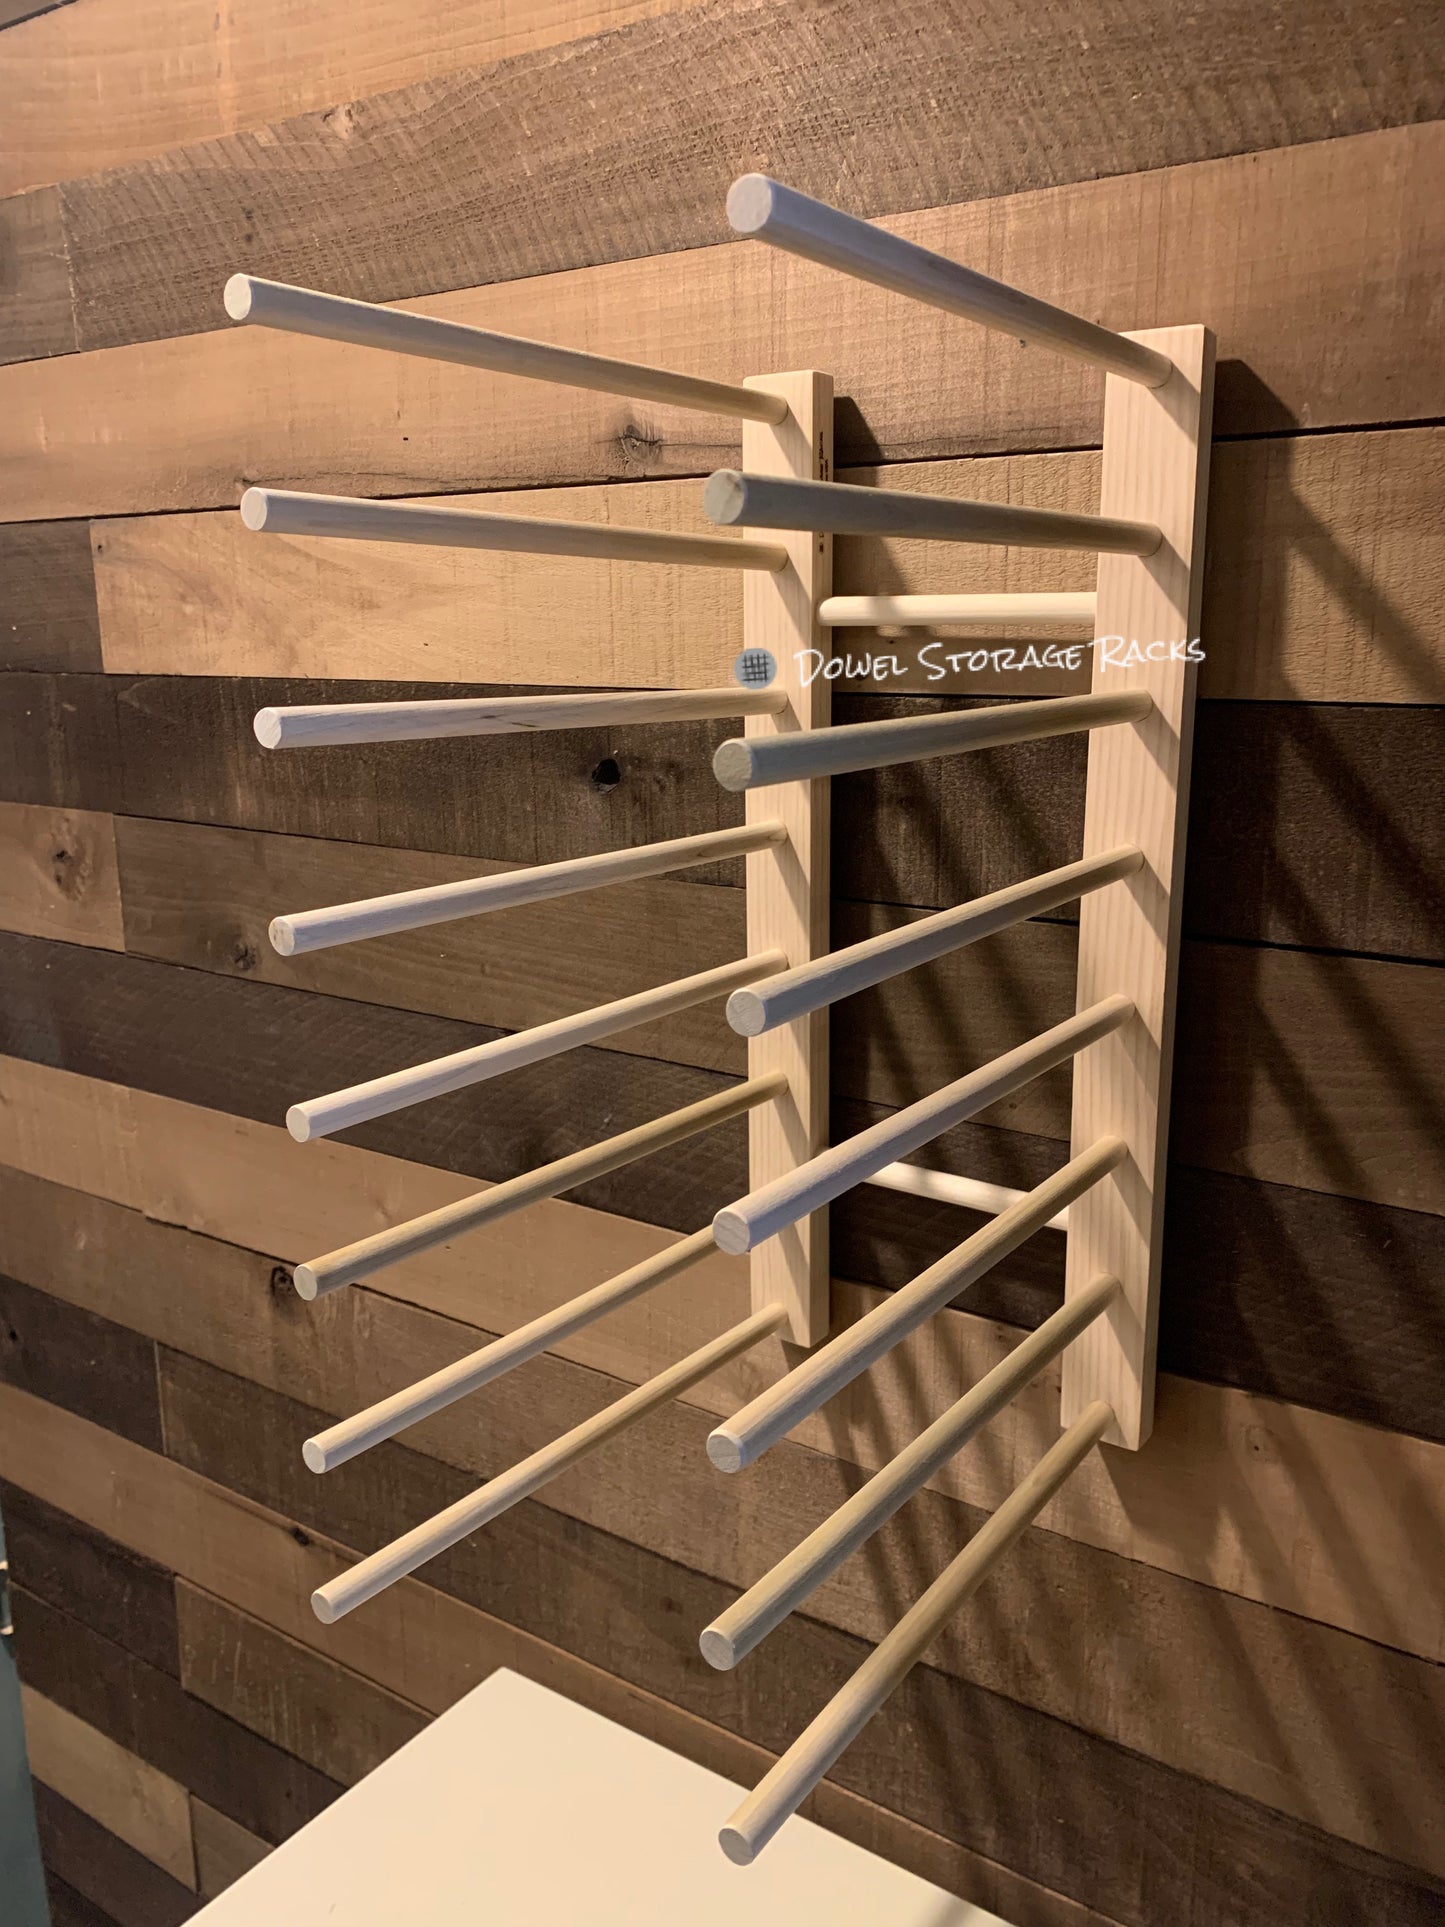 Wall Mount Art Storage/Drying Rack - 18.5" x 8" with 12" dowels